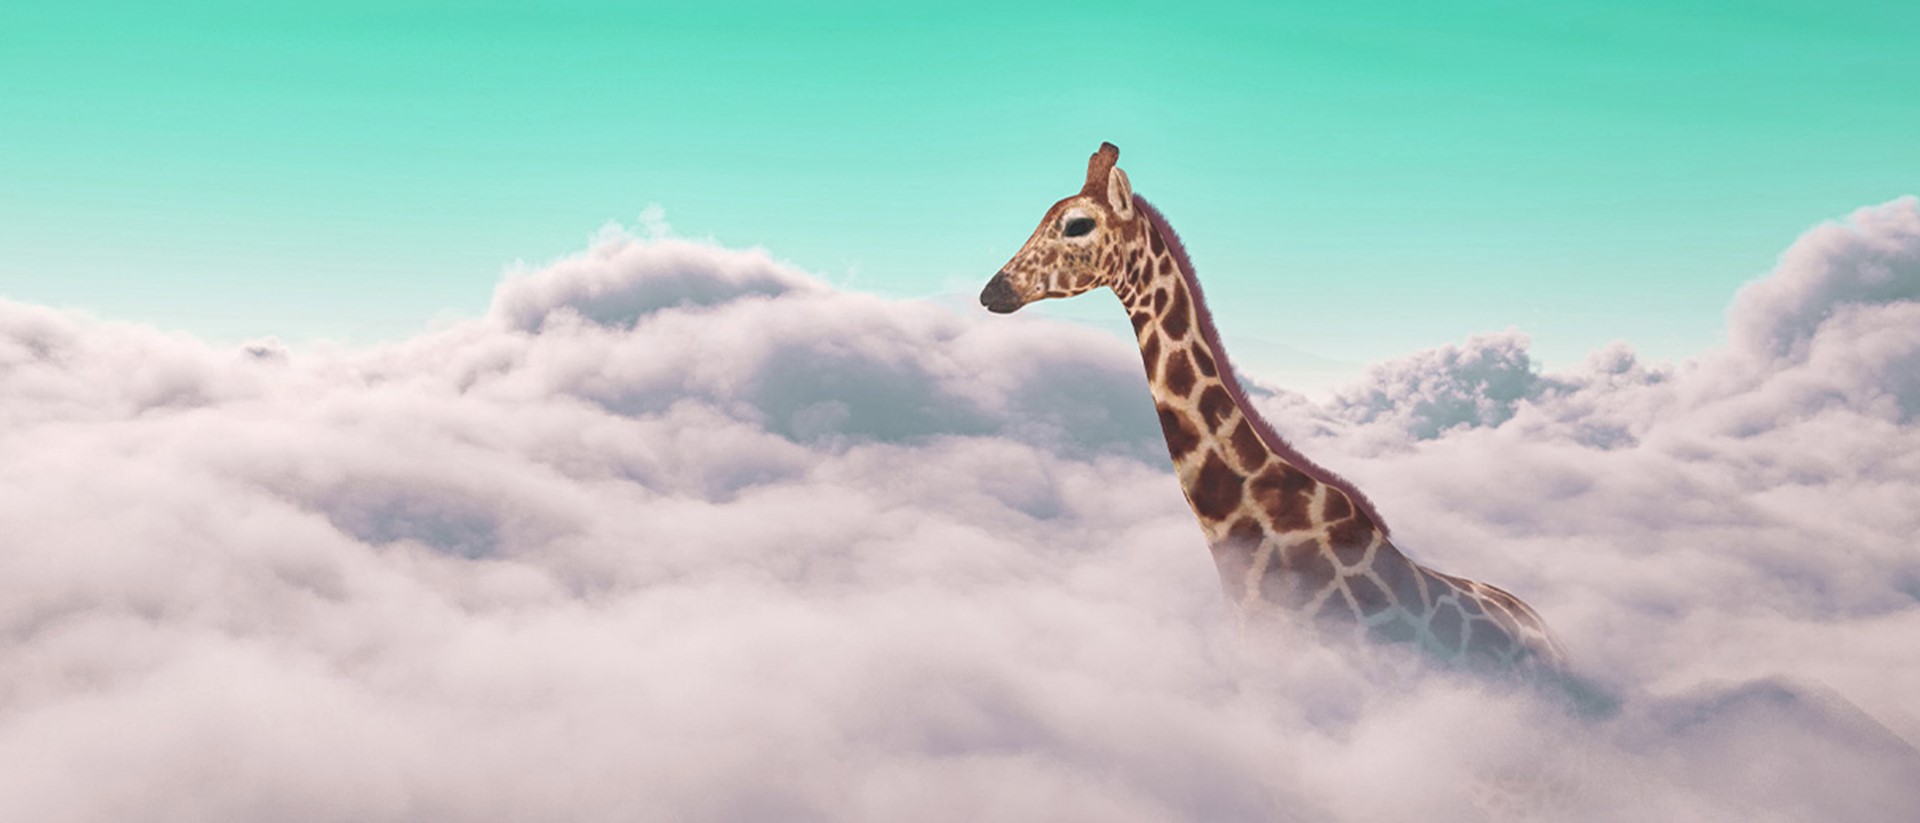 Image of a giraffe poking up through clouds with a teal sky